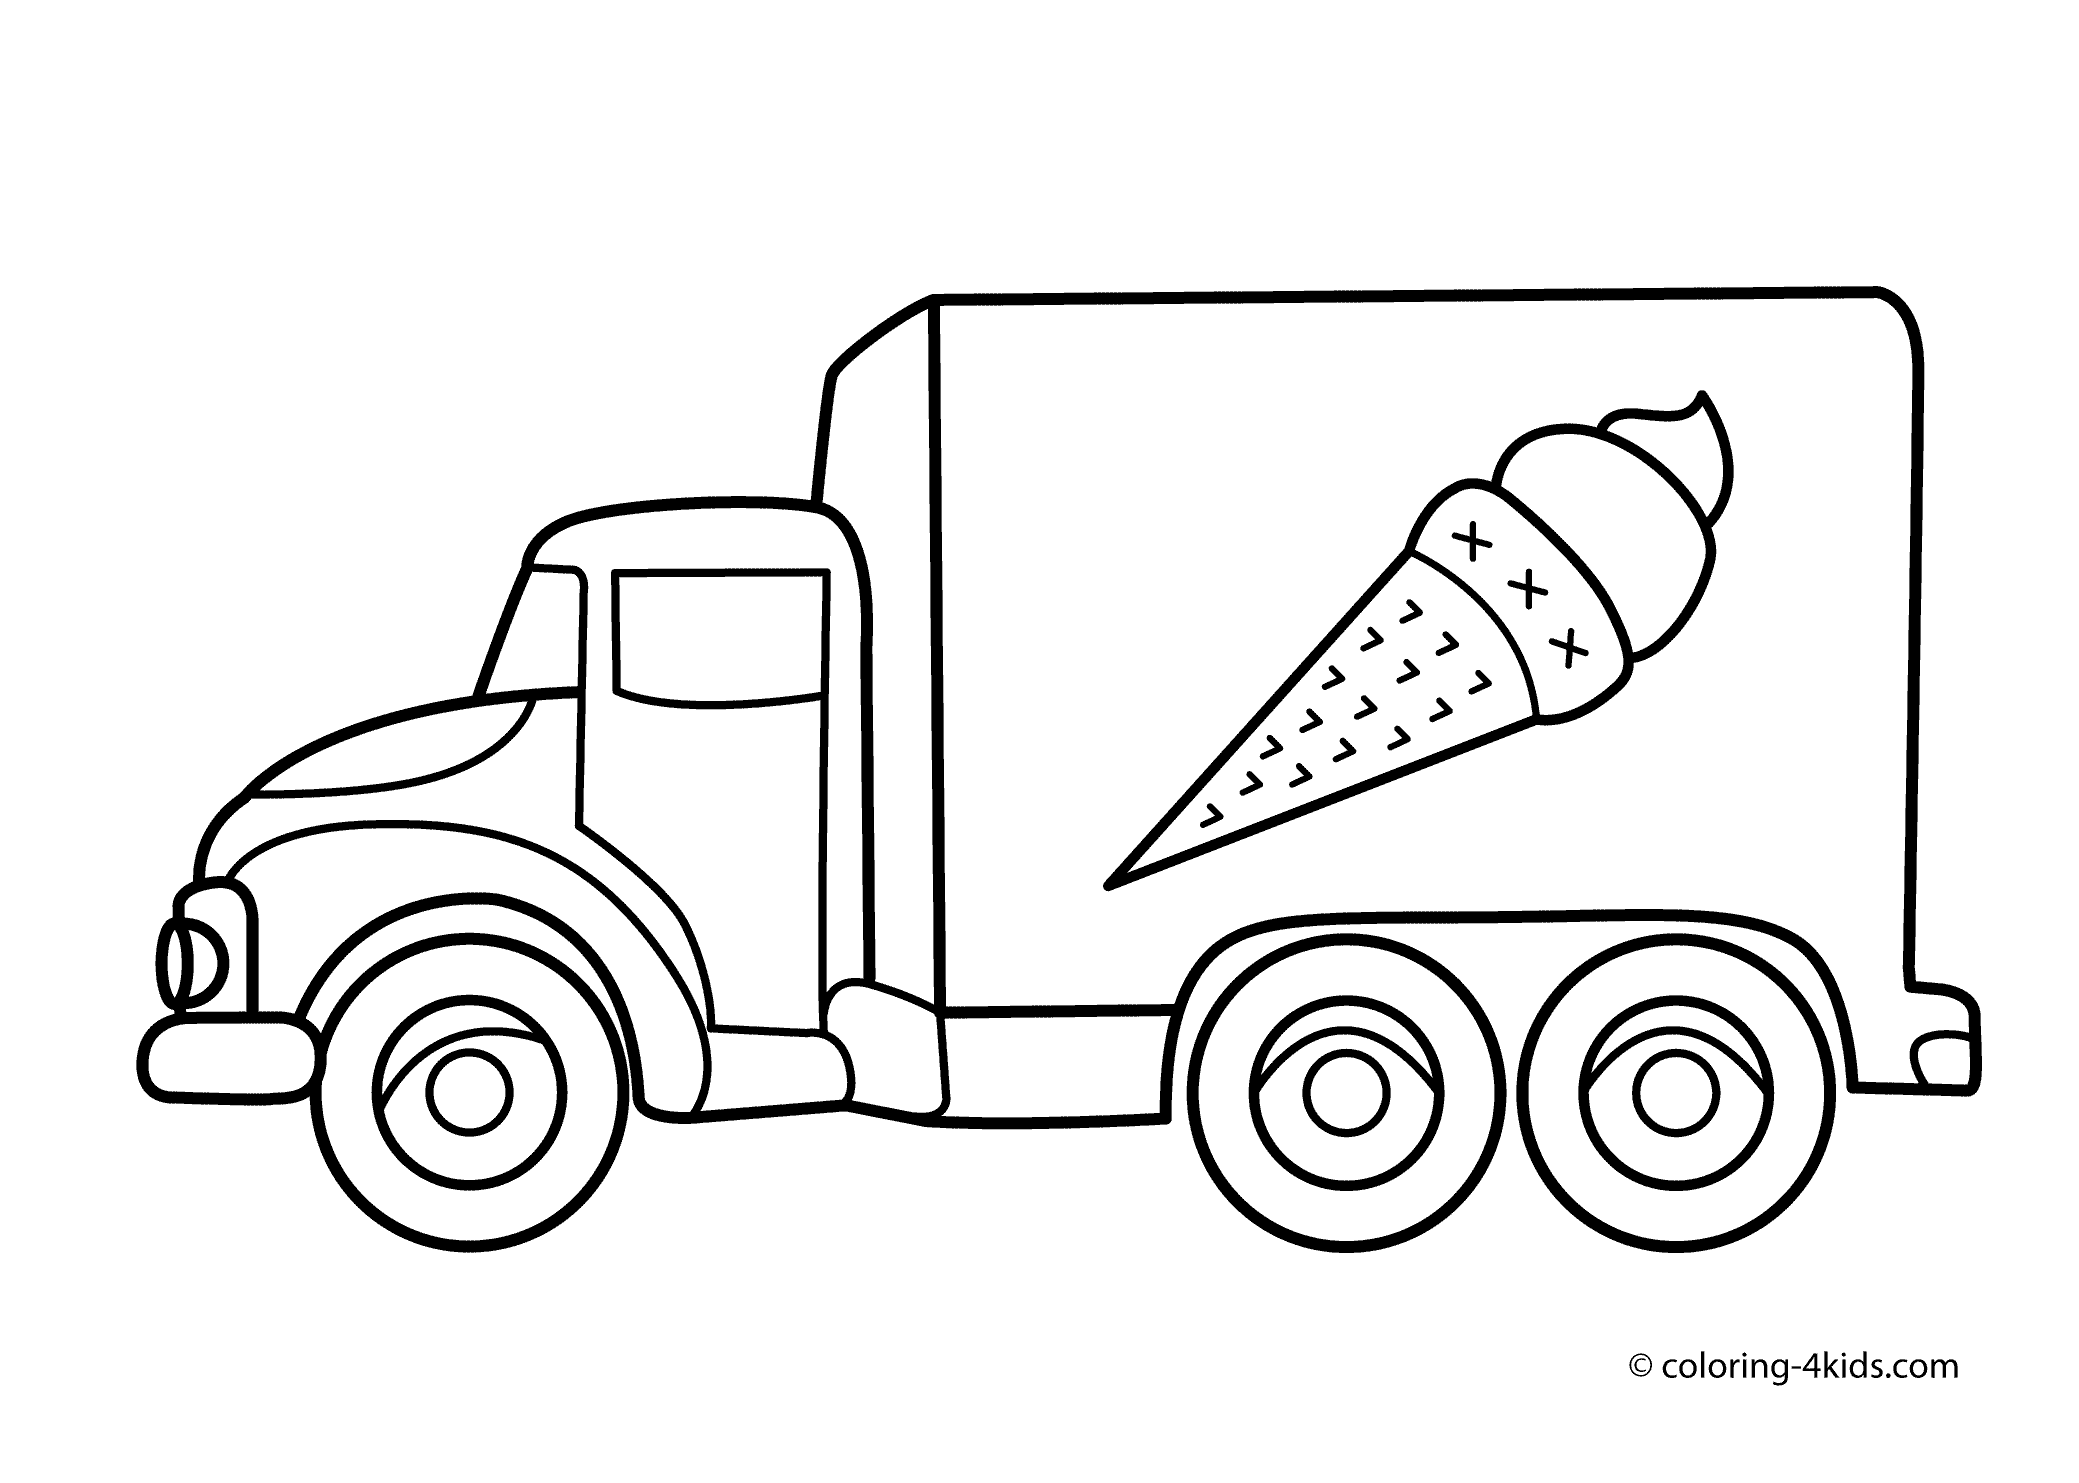 5+ Truck Clipart Black And White.